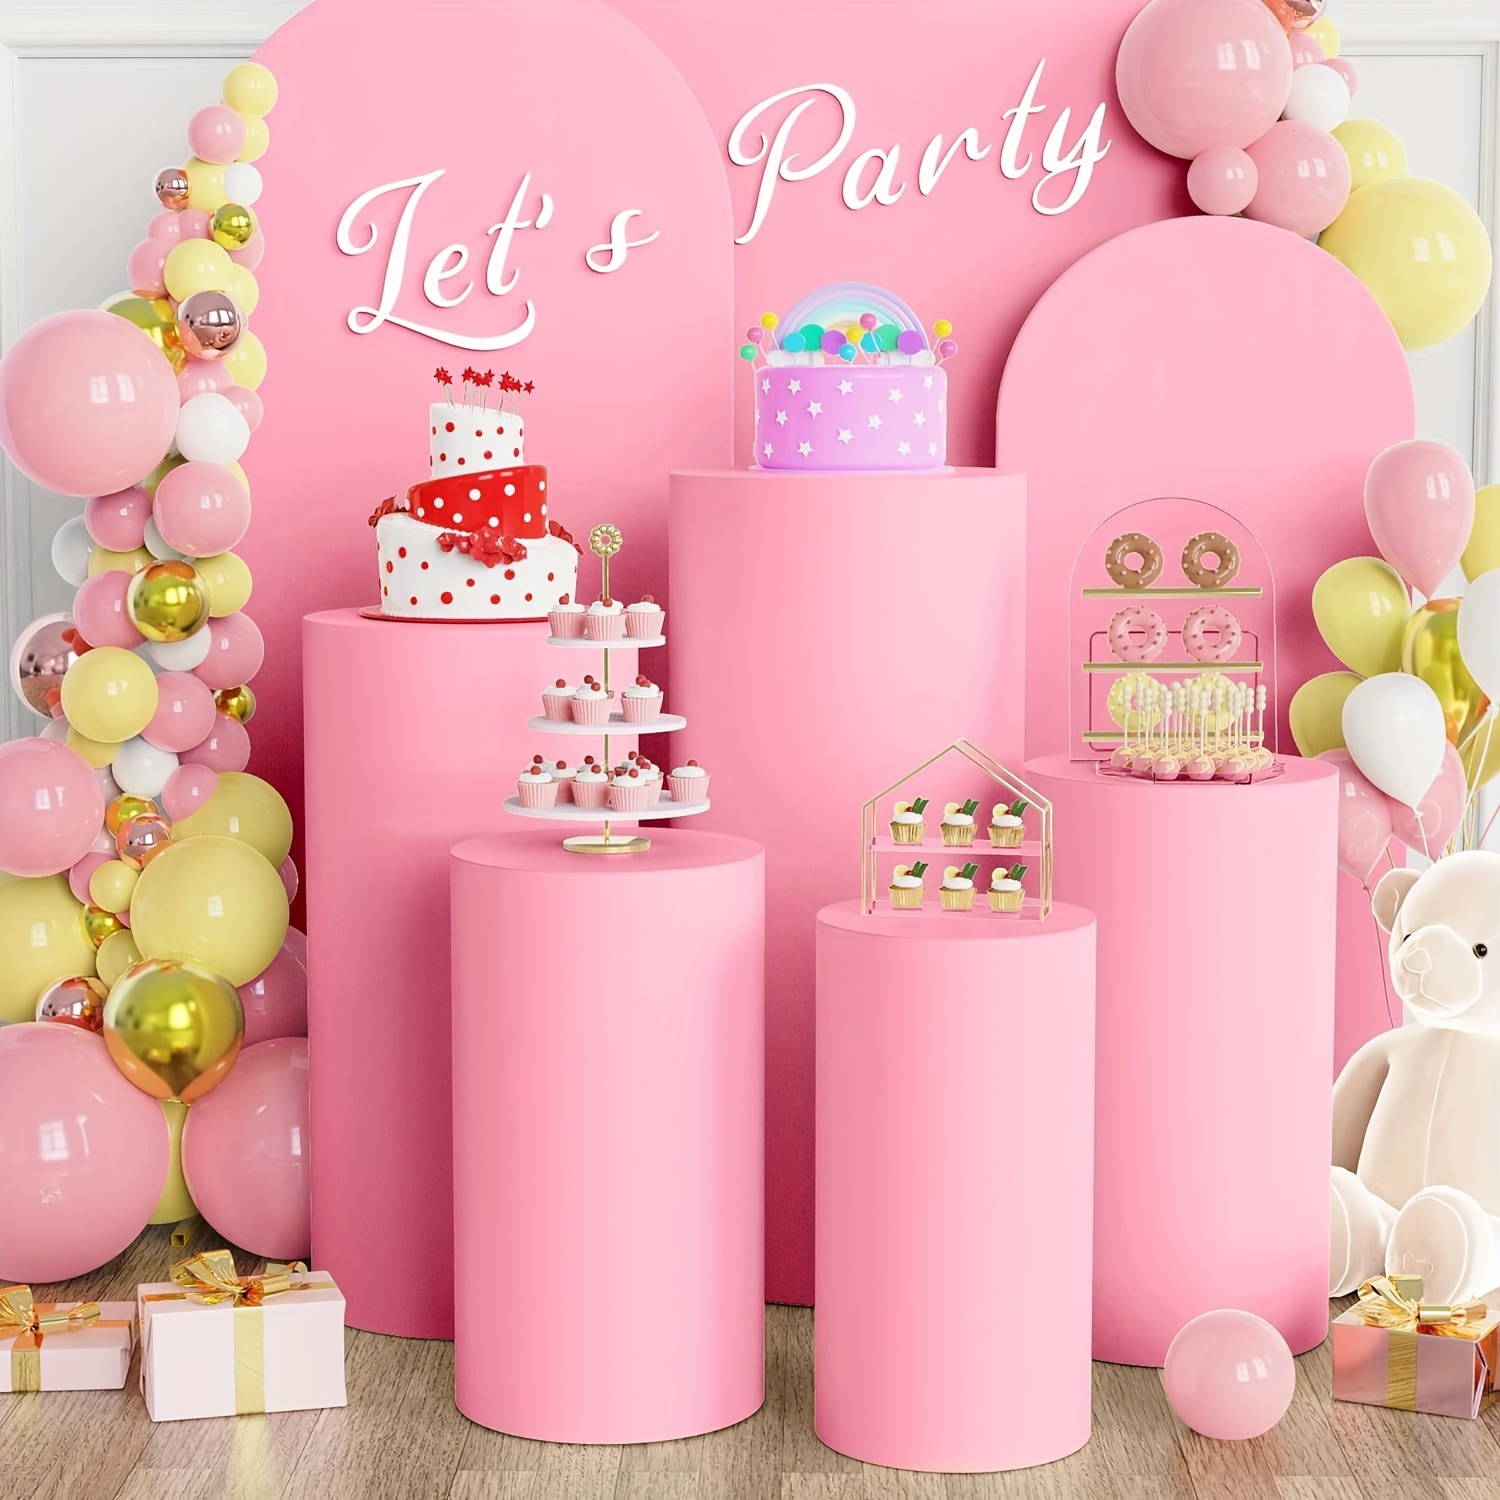 5-Piece Stretch Cylinder Pedestal Covers Set, Polyester Round Column Wraps for Party, Wedding, Birthday, Anniversary, and Graduation Decor, Universal Fit for Dessert Display Stands - Includes Covers Only, No Cylinder Pedestals.